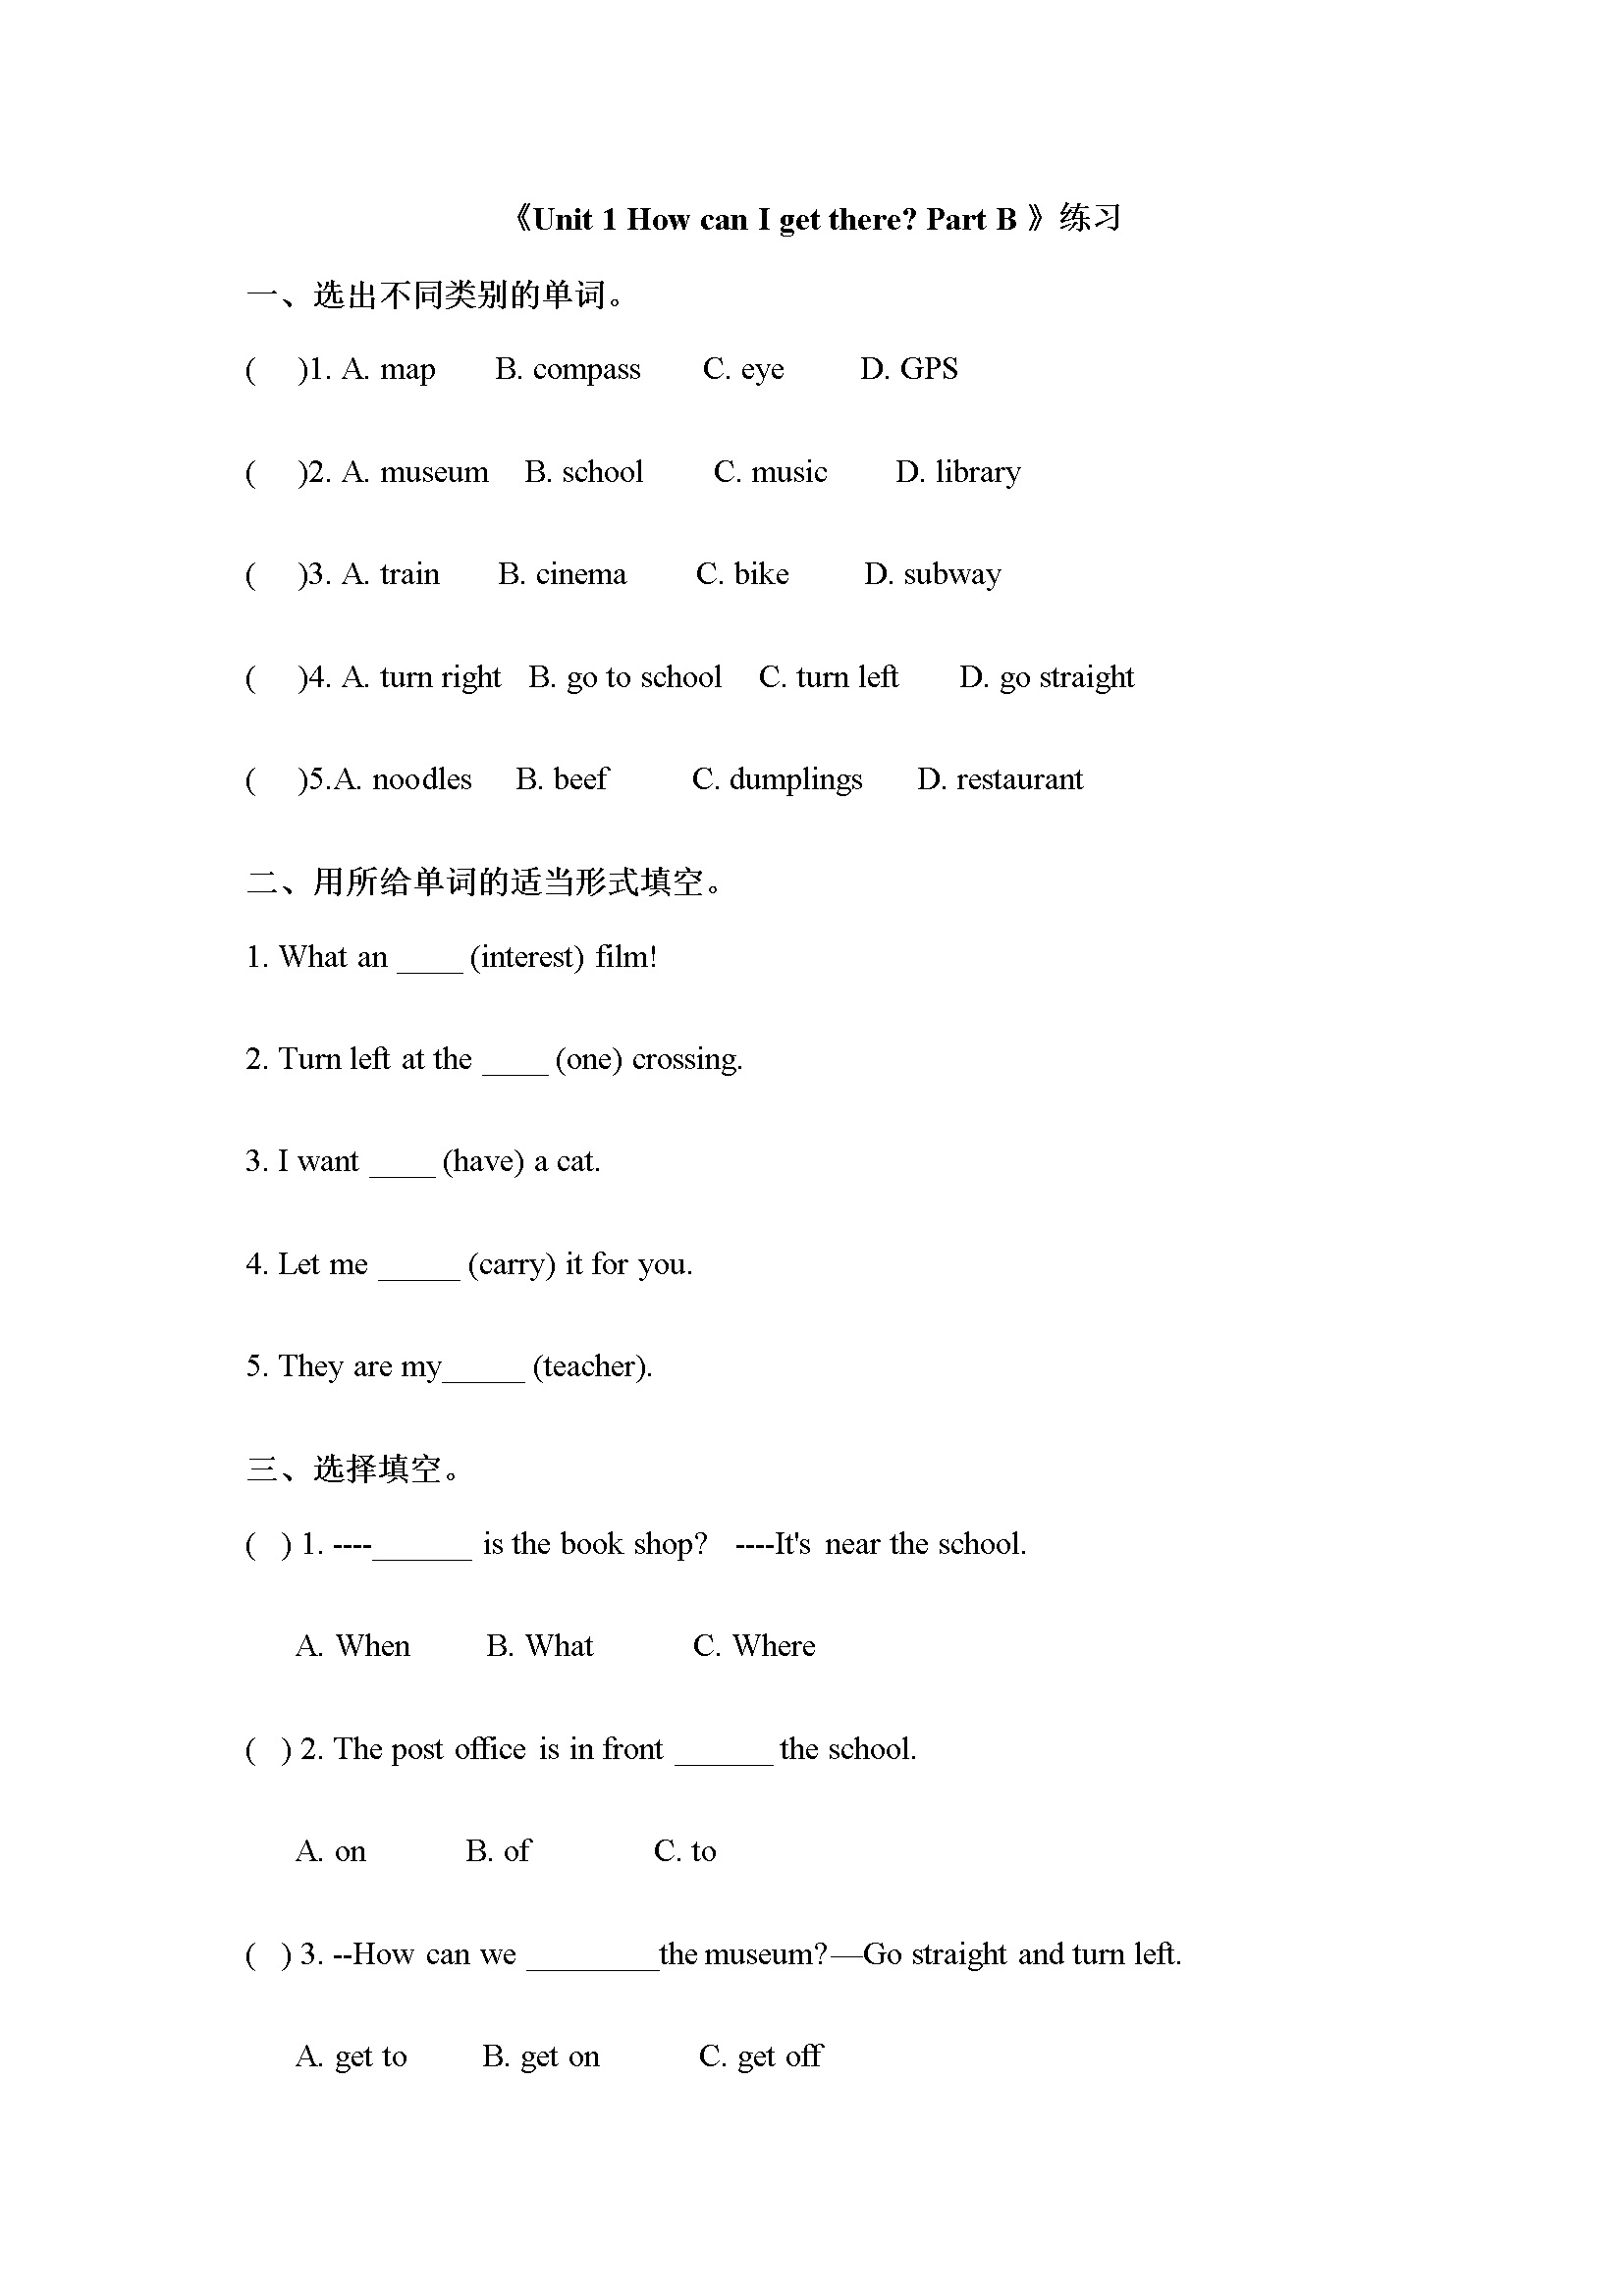 Unit 1 how can i get there part B- 人教（PEP)